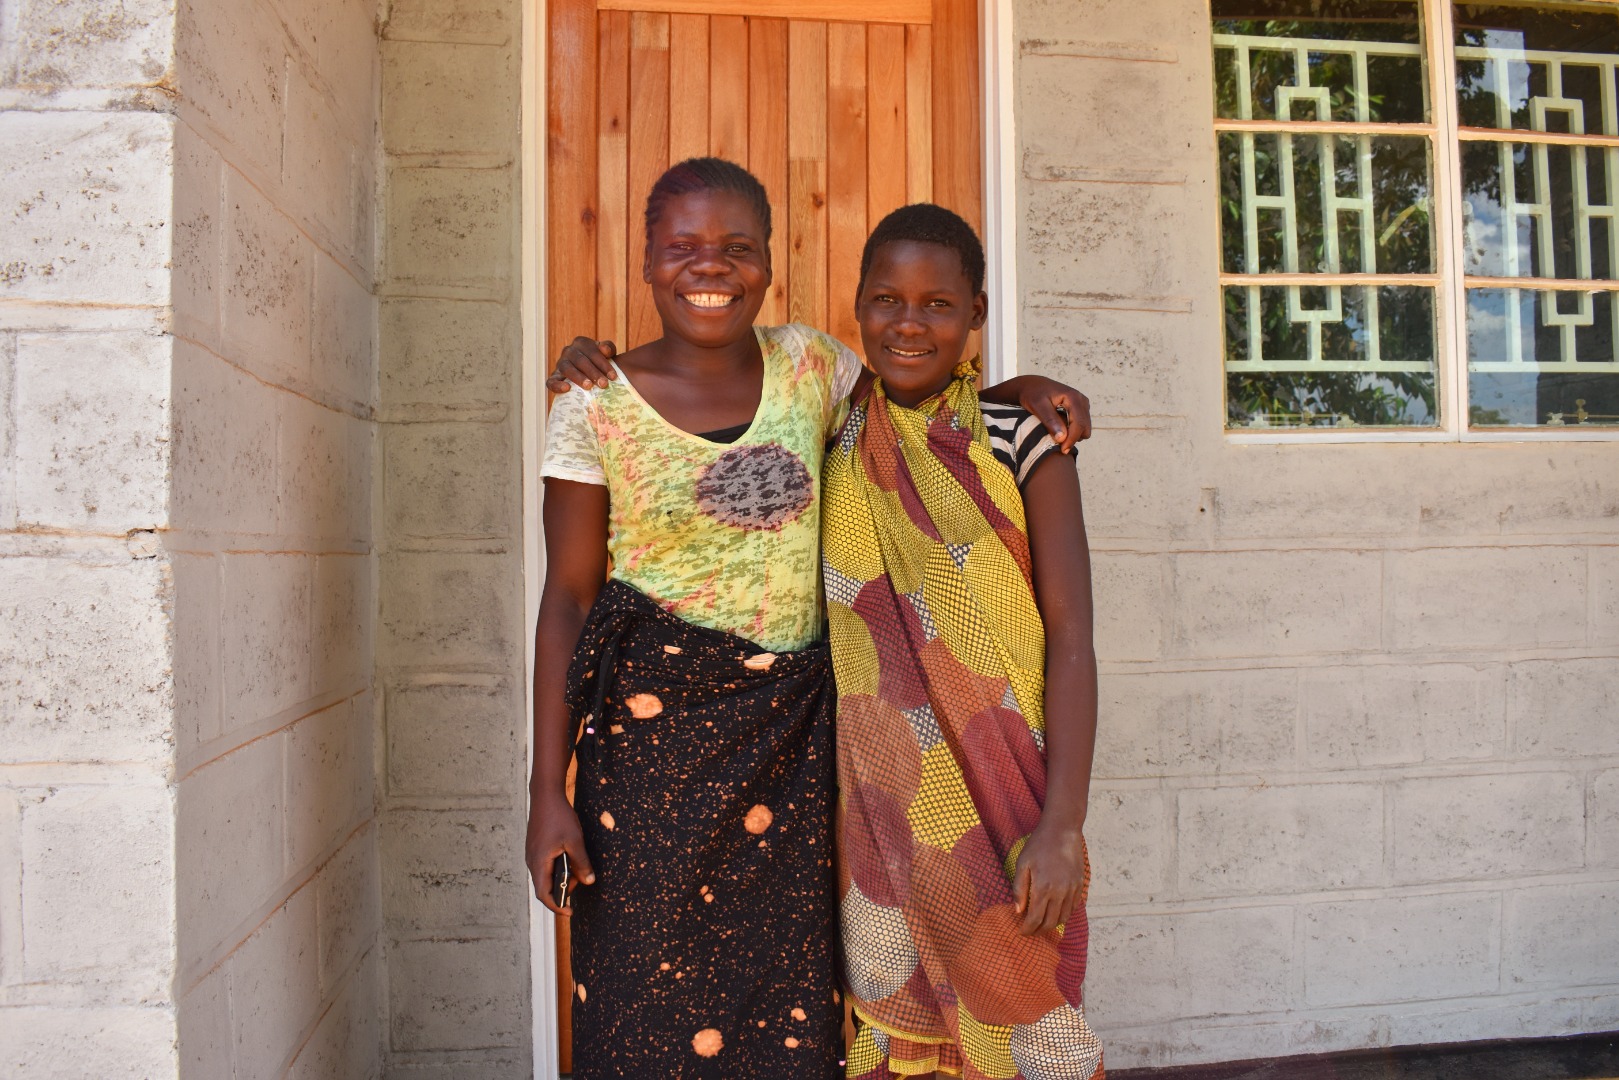 Chikondi and her sister stand, smiling, outside their Habitat home in Malawi. The sisters are both wearing colourful clothes and have their arms around each other.